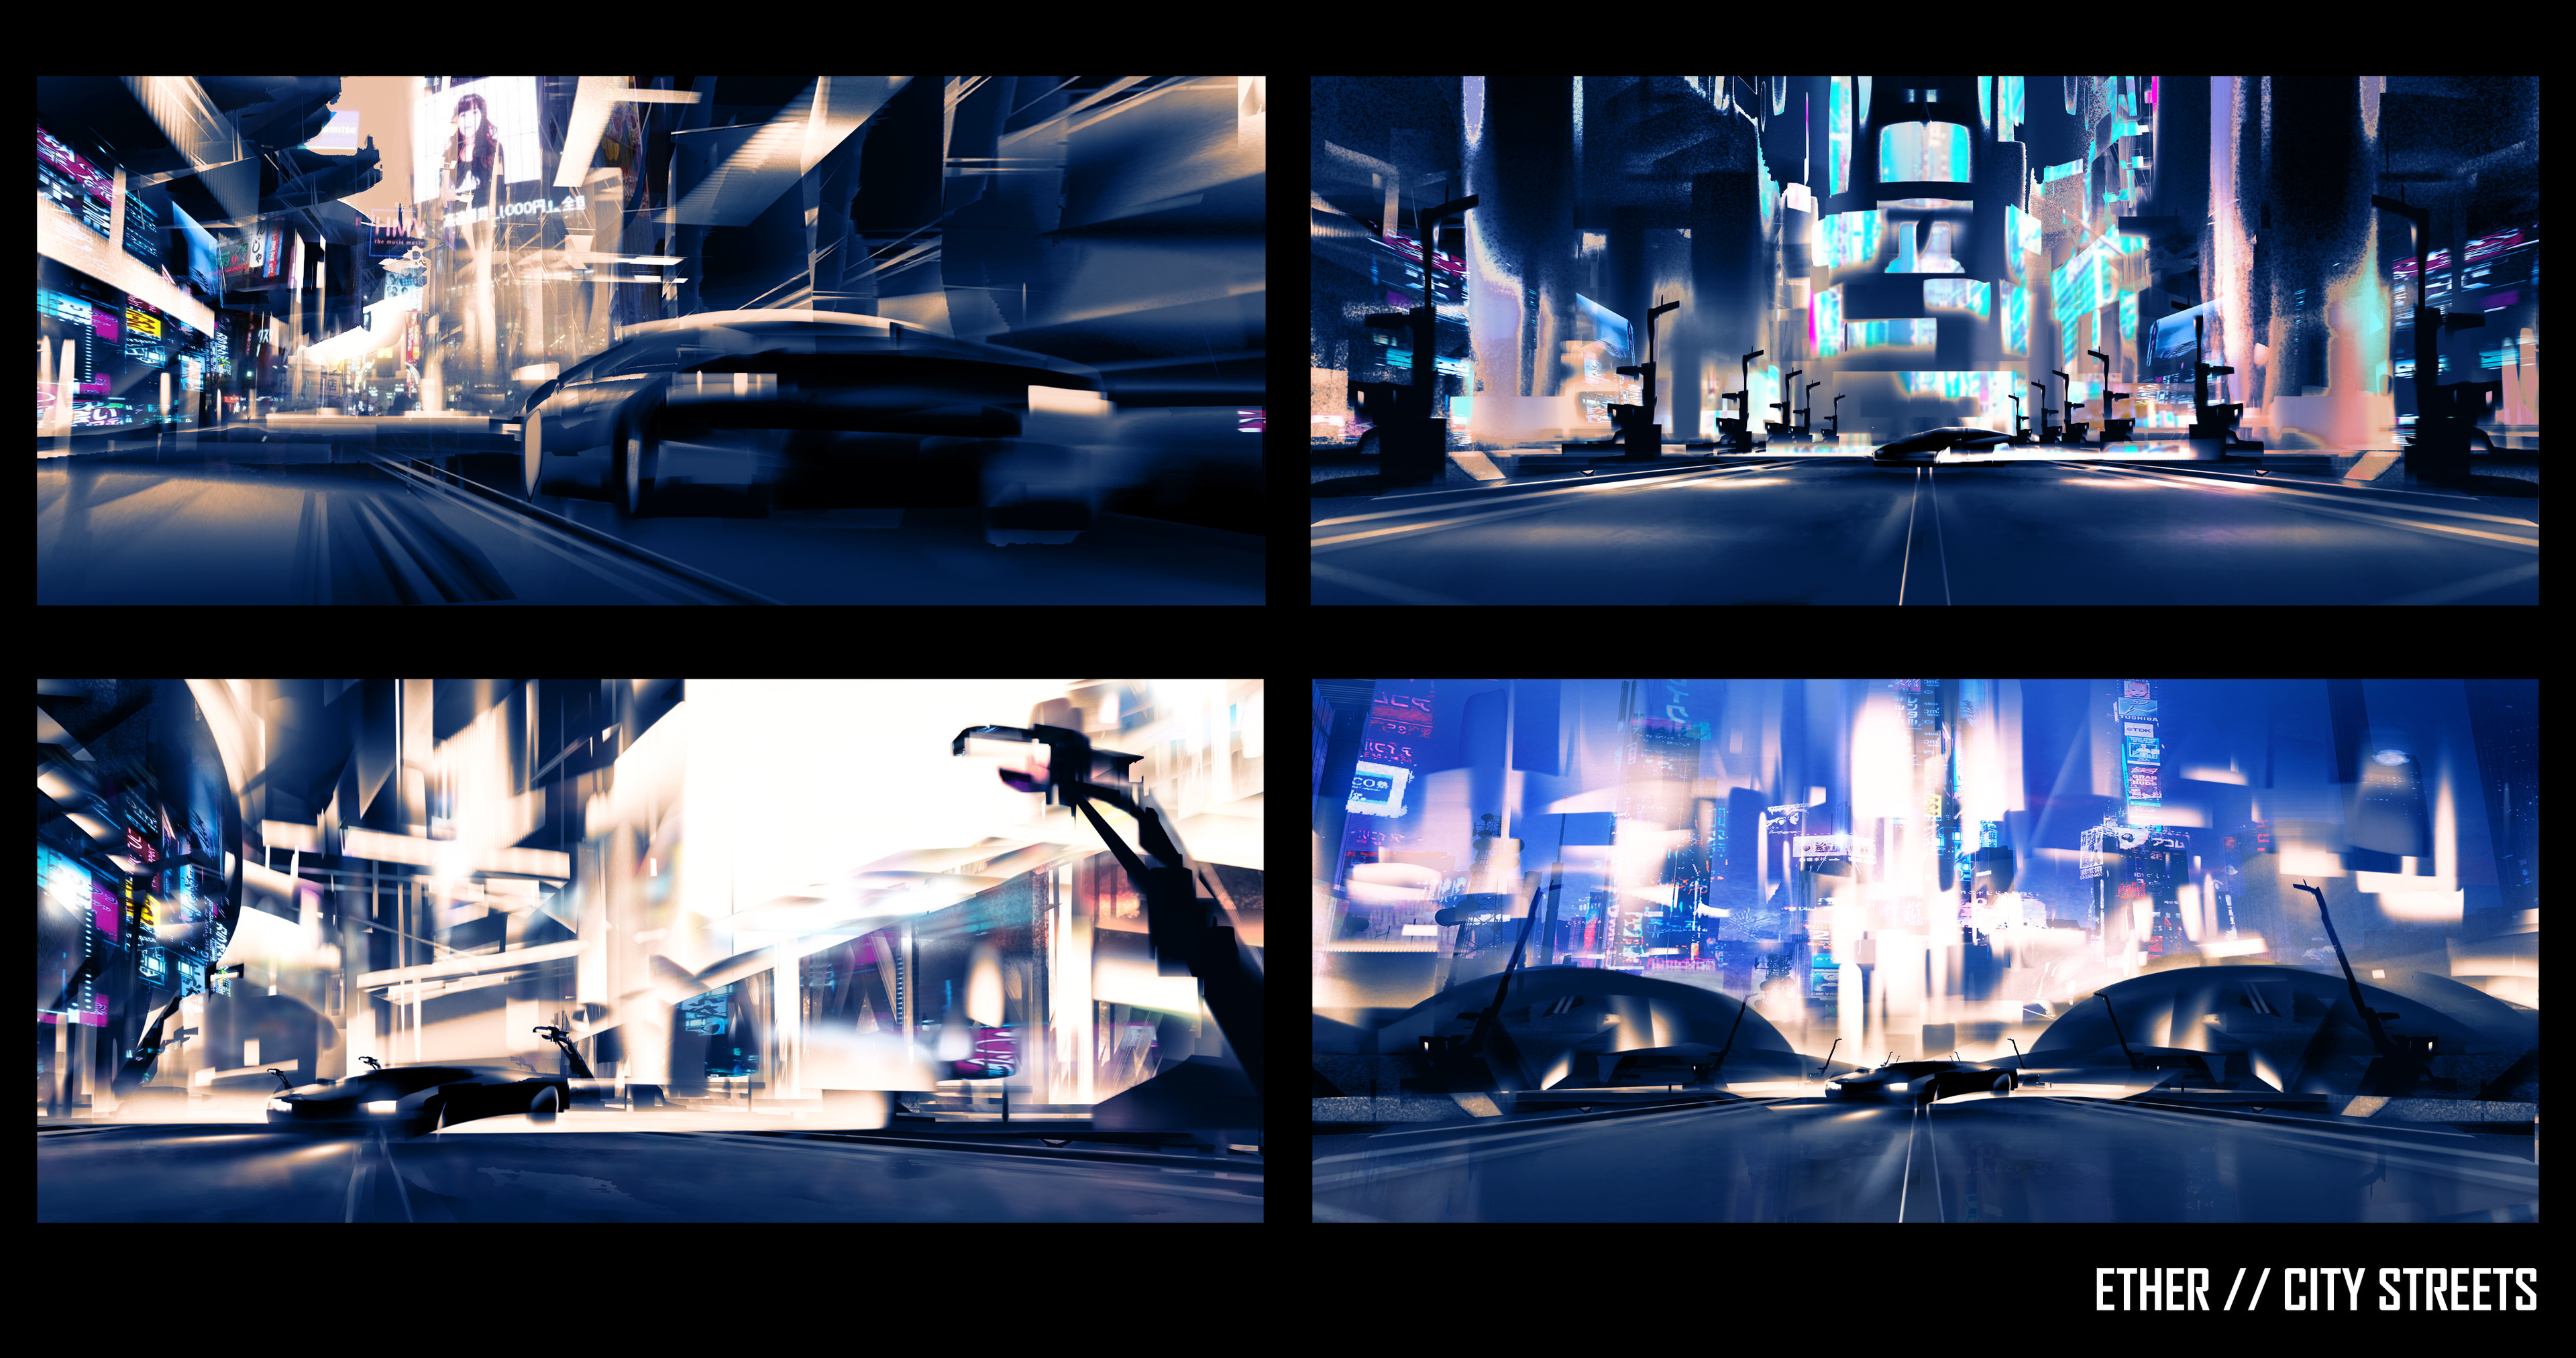 color sketching of the city streets. playing with how the city lights would silhouette the car and characters.